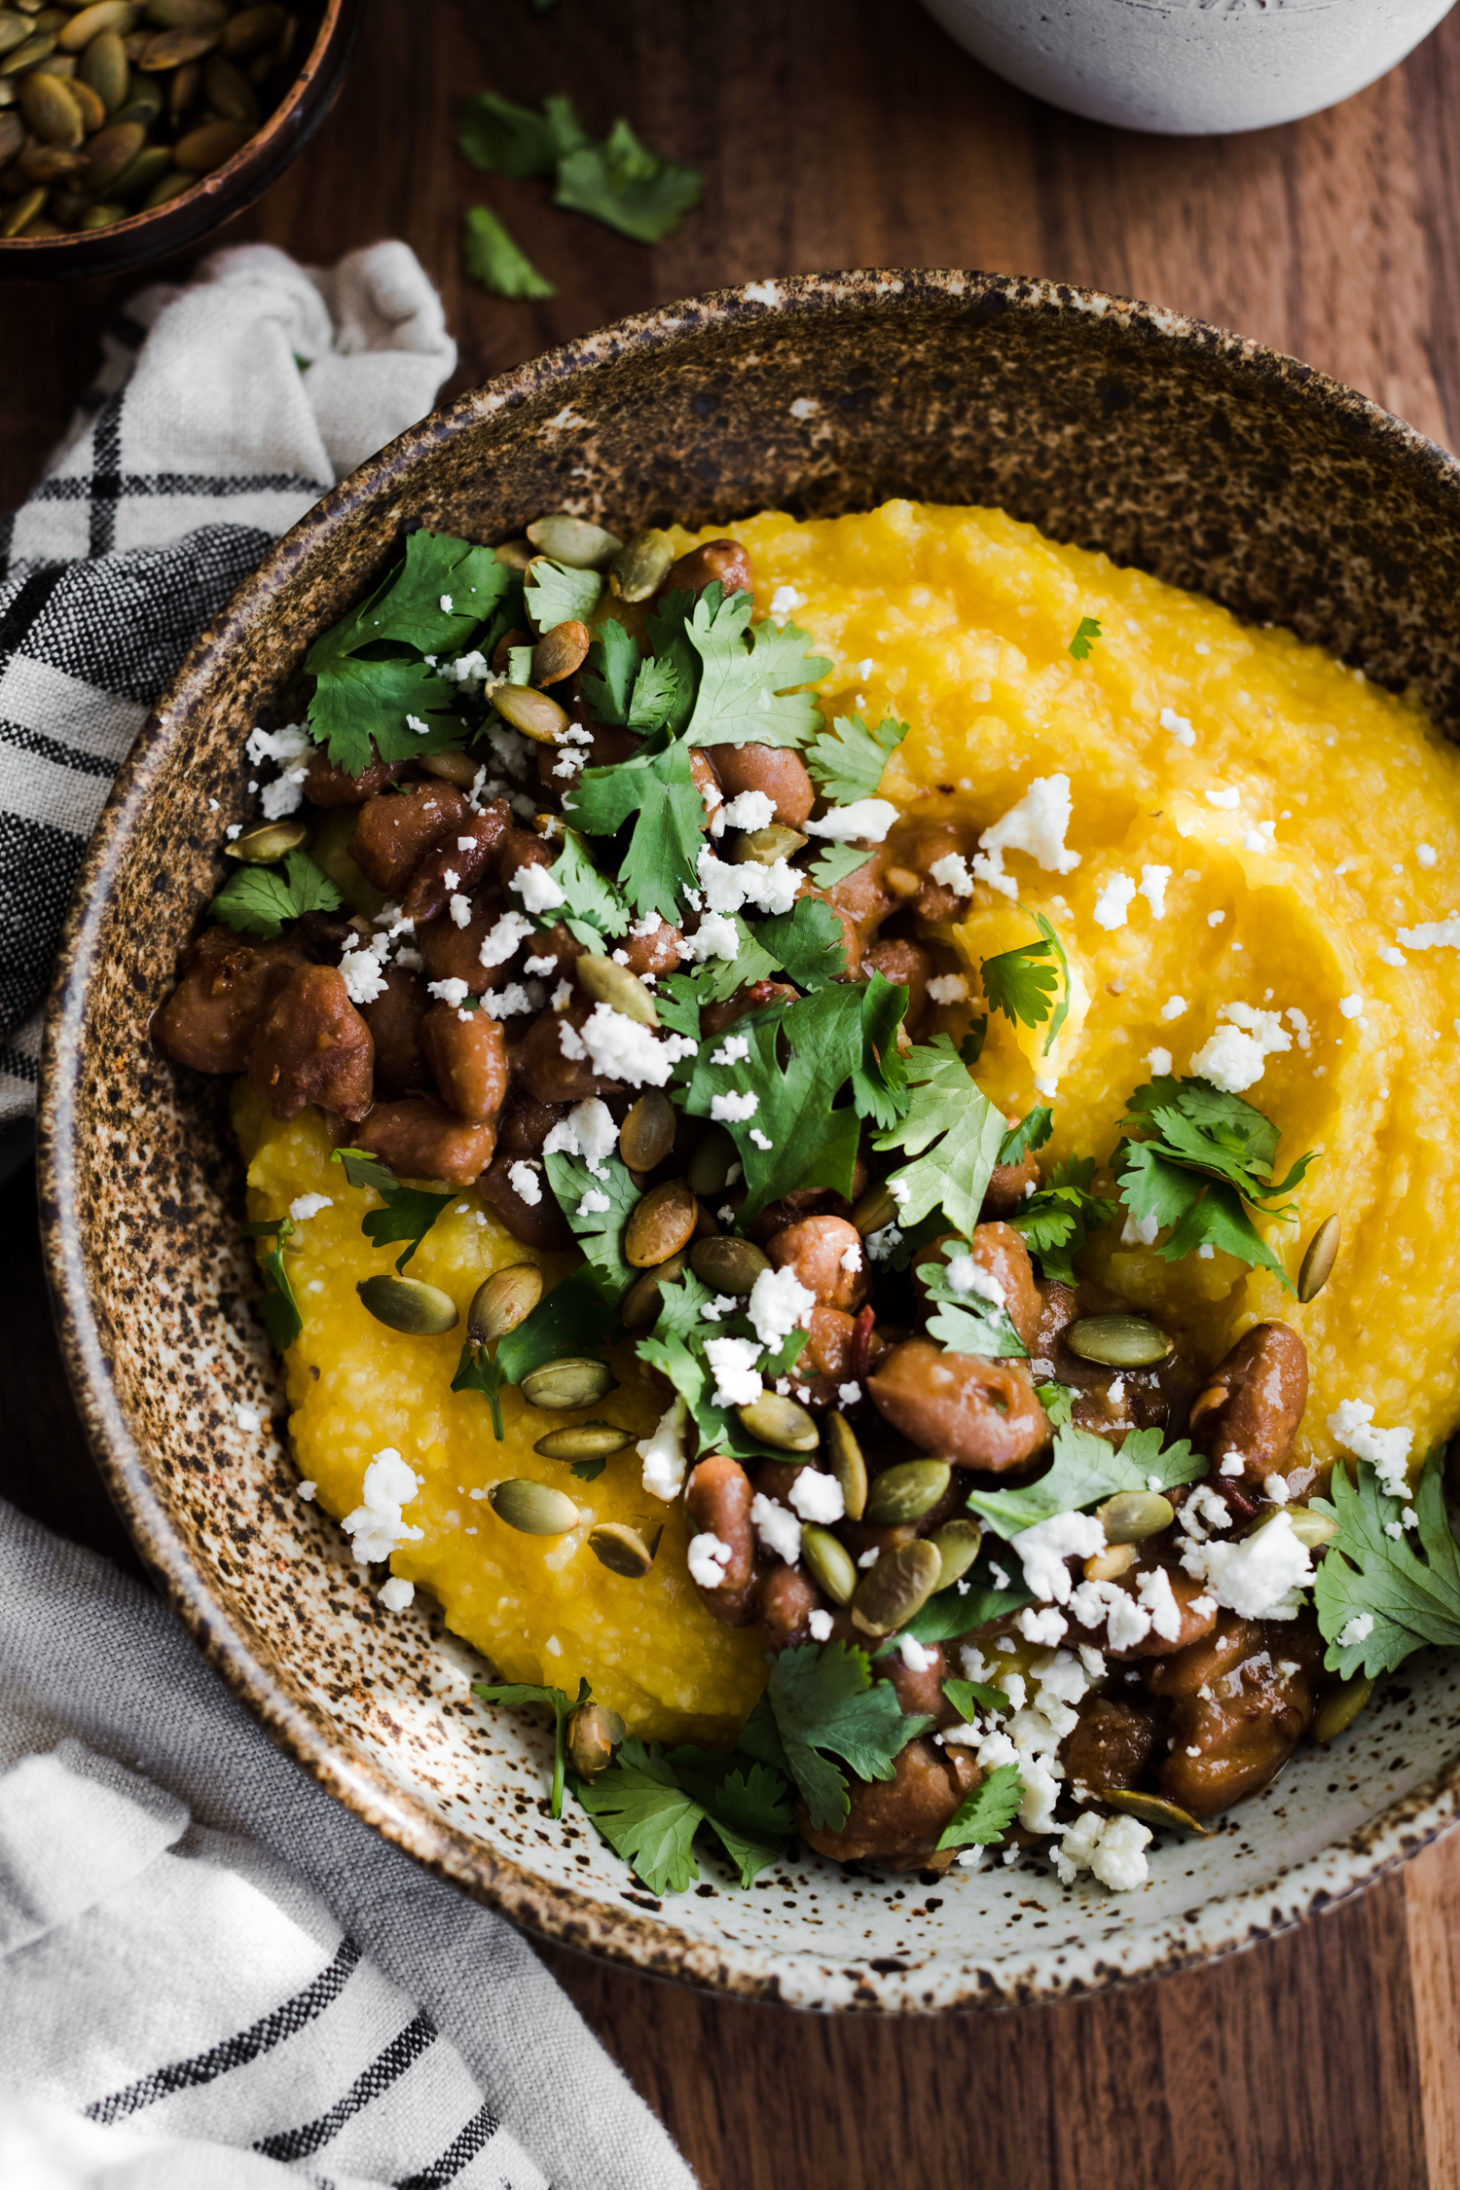 Roasted Pumpkin Polenta with Pinto Beans